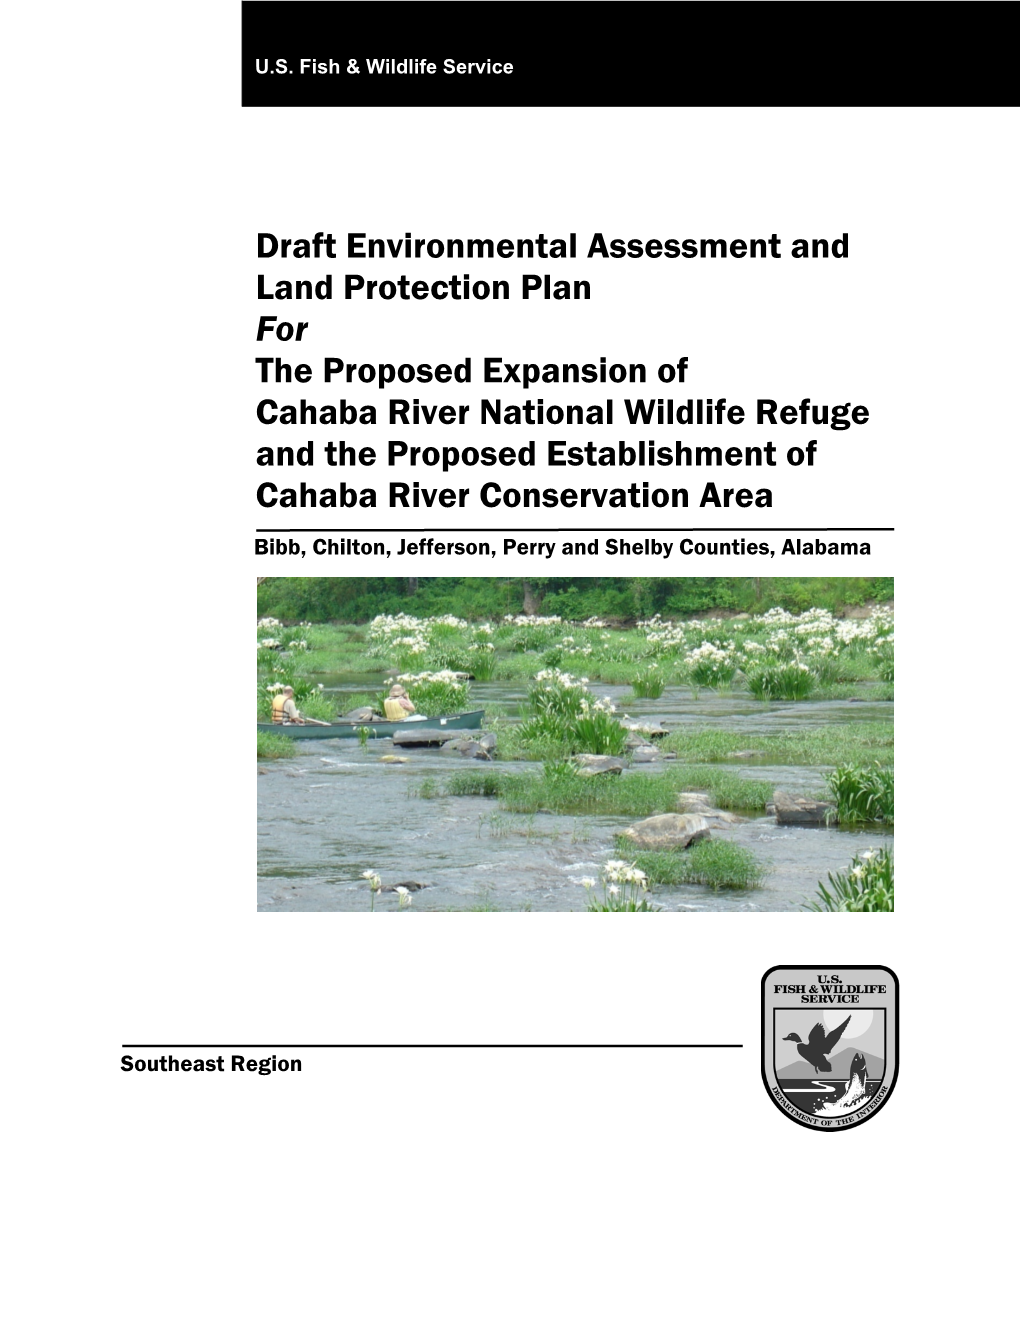 Cahaba River Env Assessment and Land Protection Plan